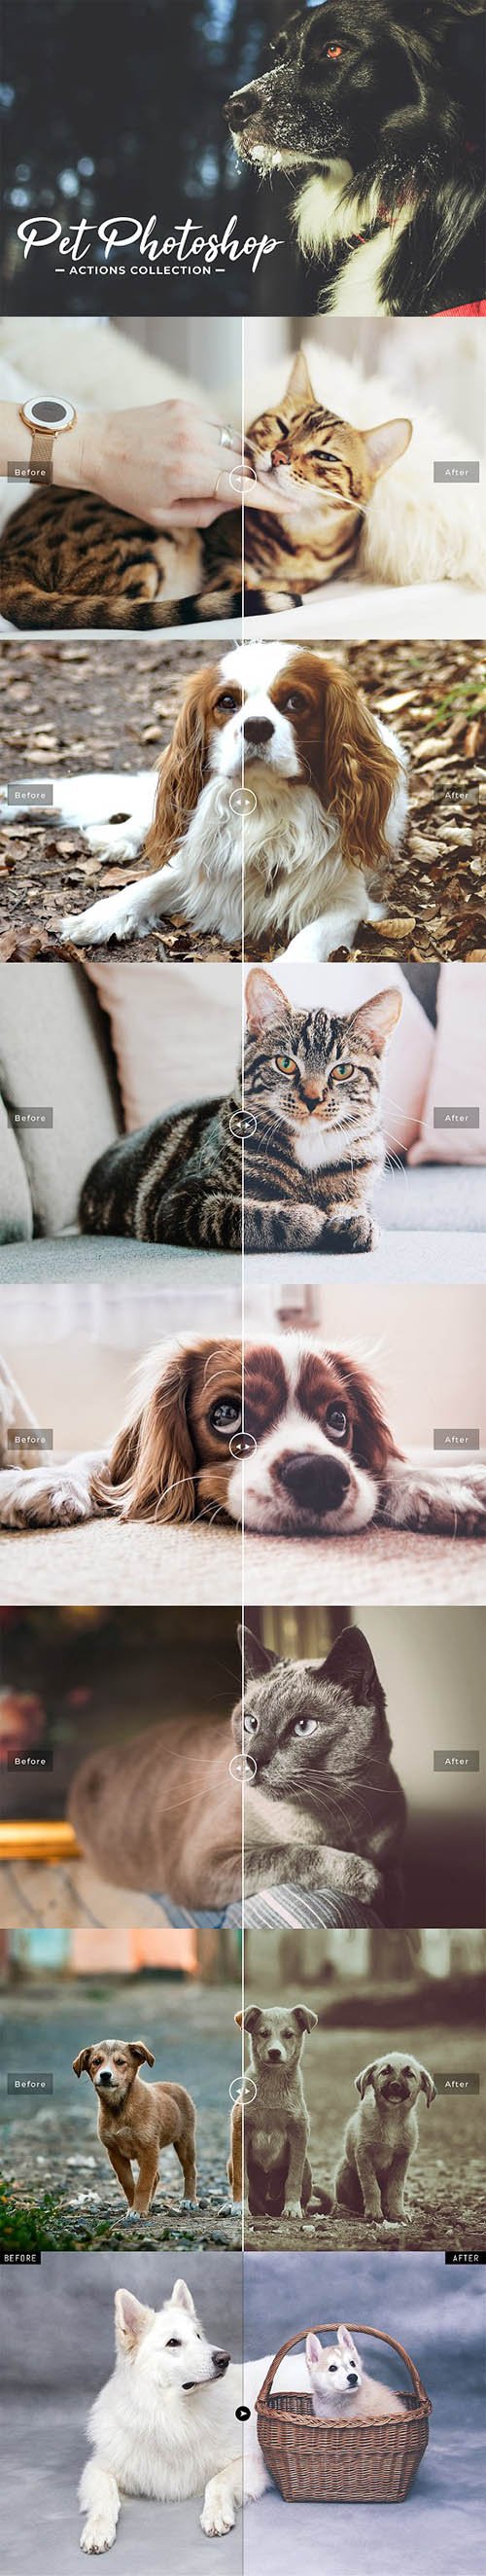 Pet Photoshop Actions Collection 2753974